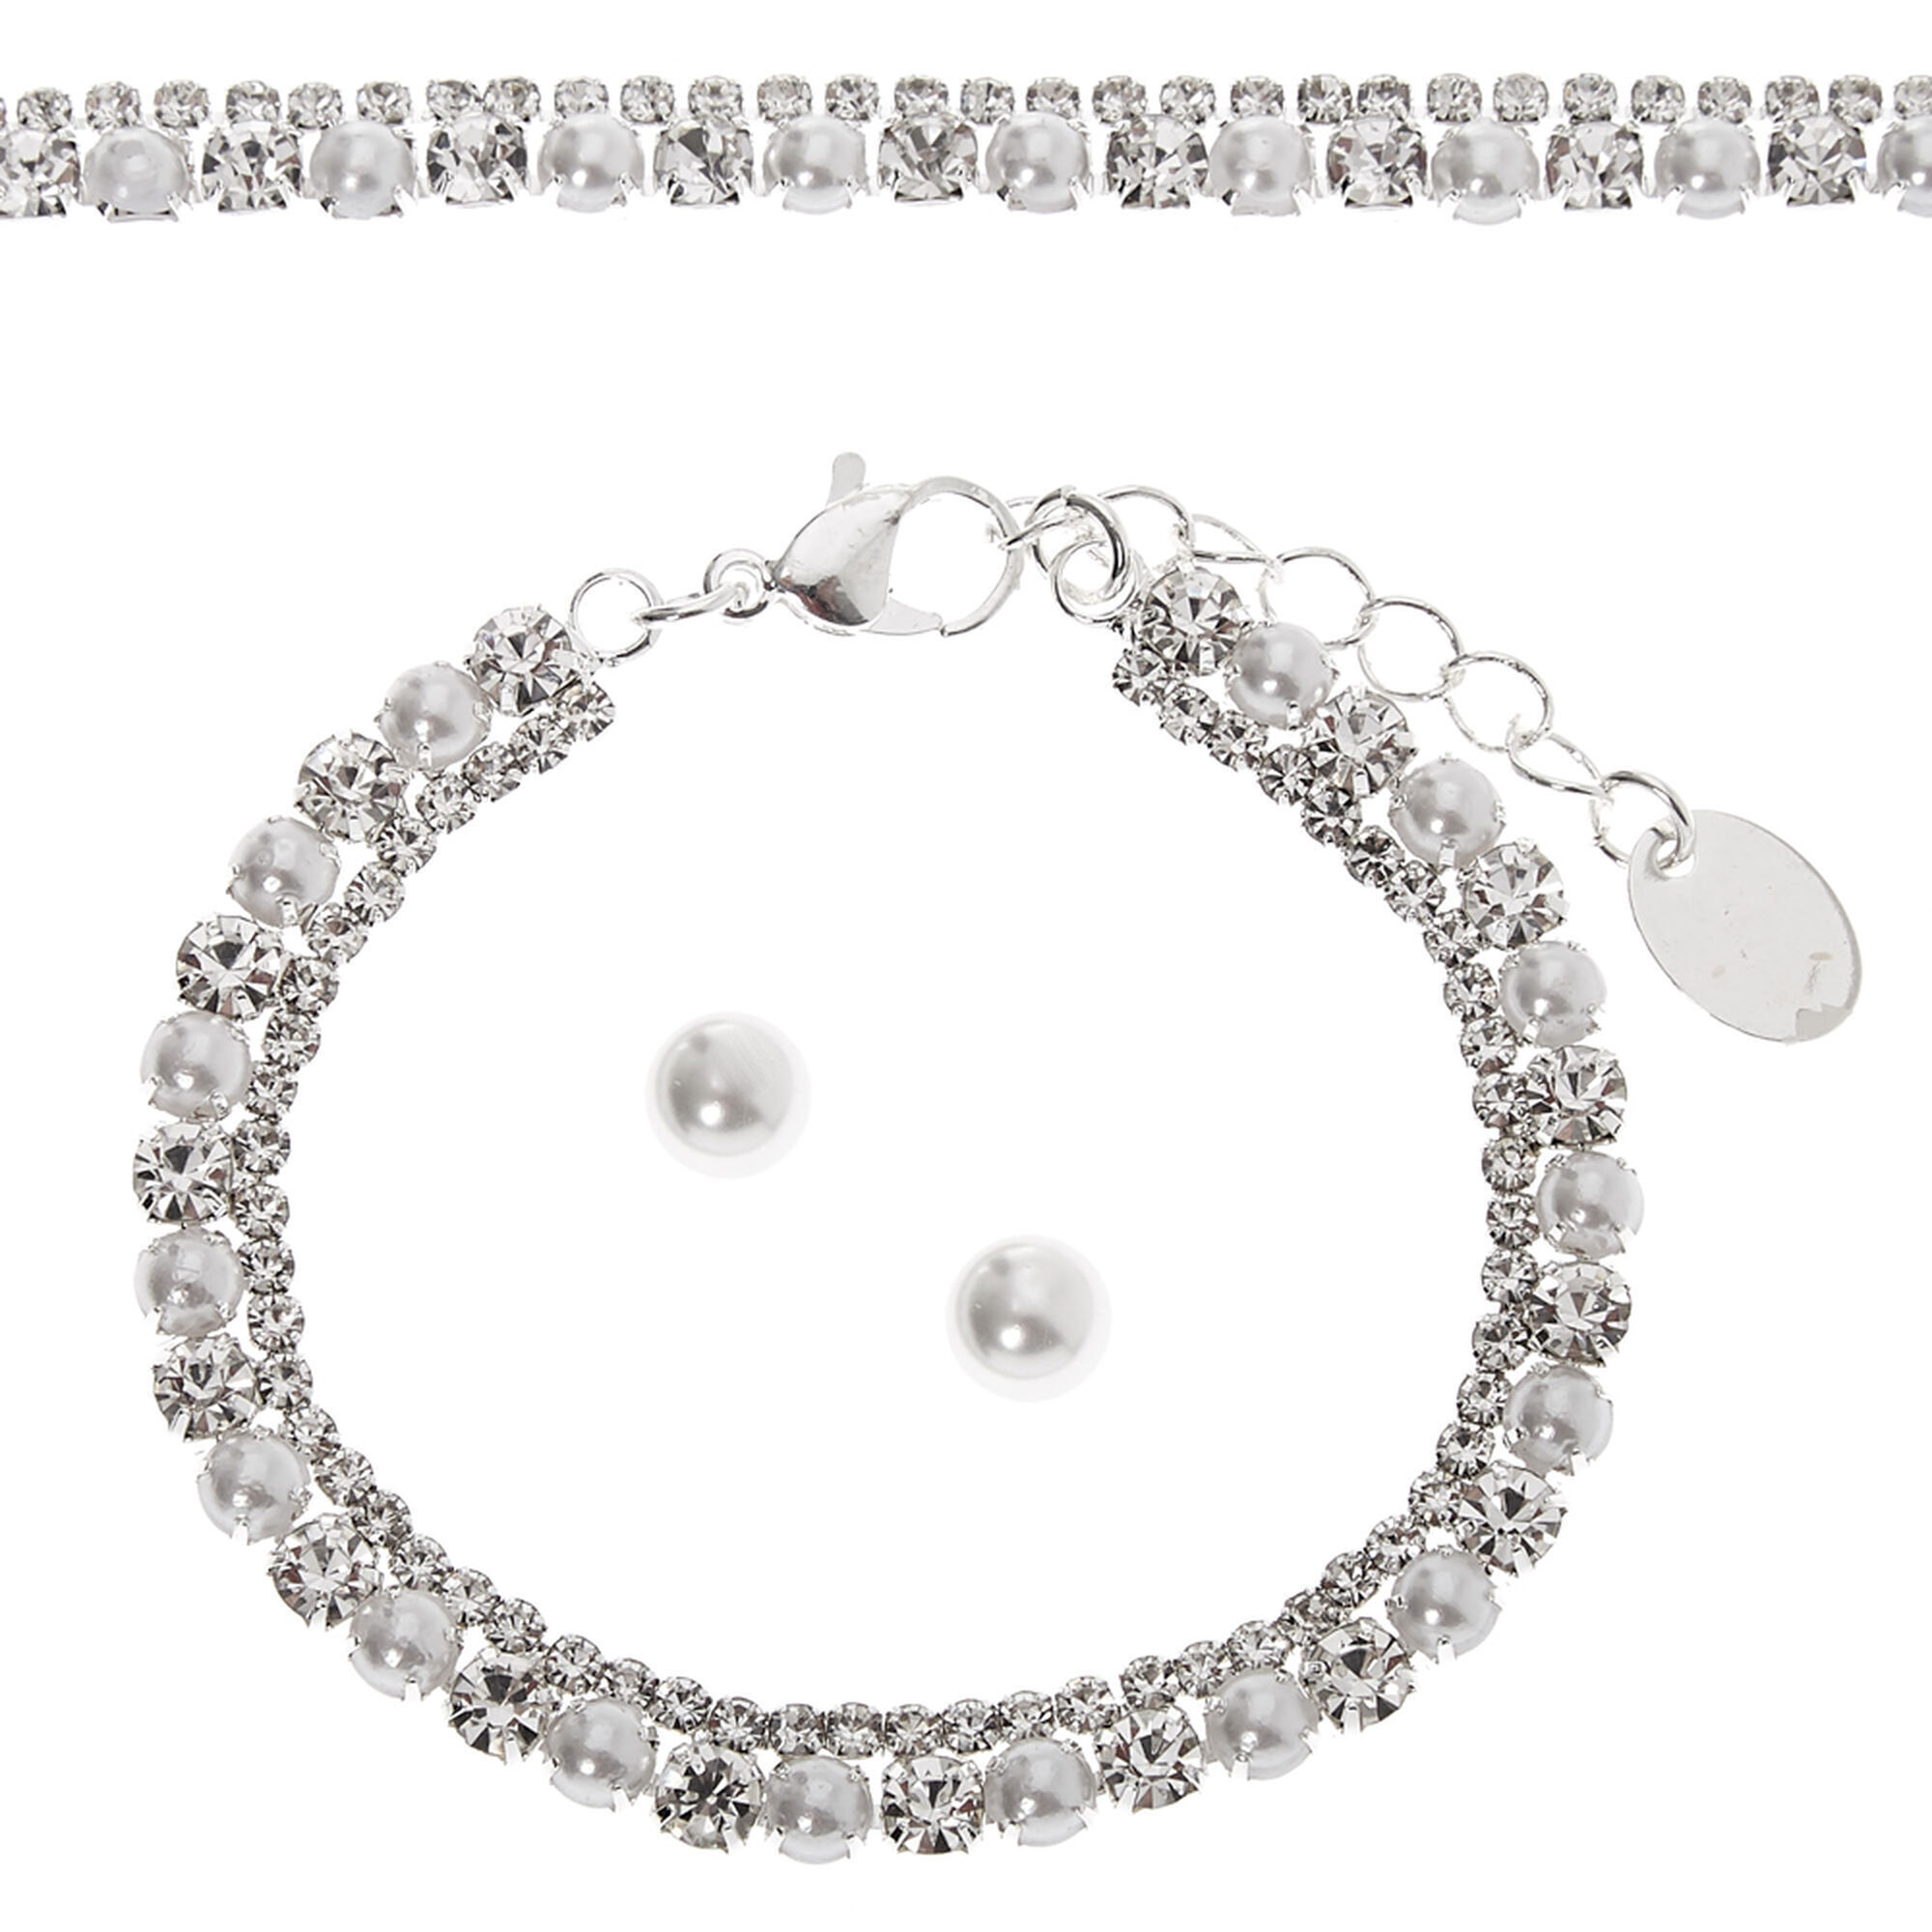 Claire's Silver Pearl & Rhinestone Jewelry Set - 3 Pack